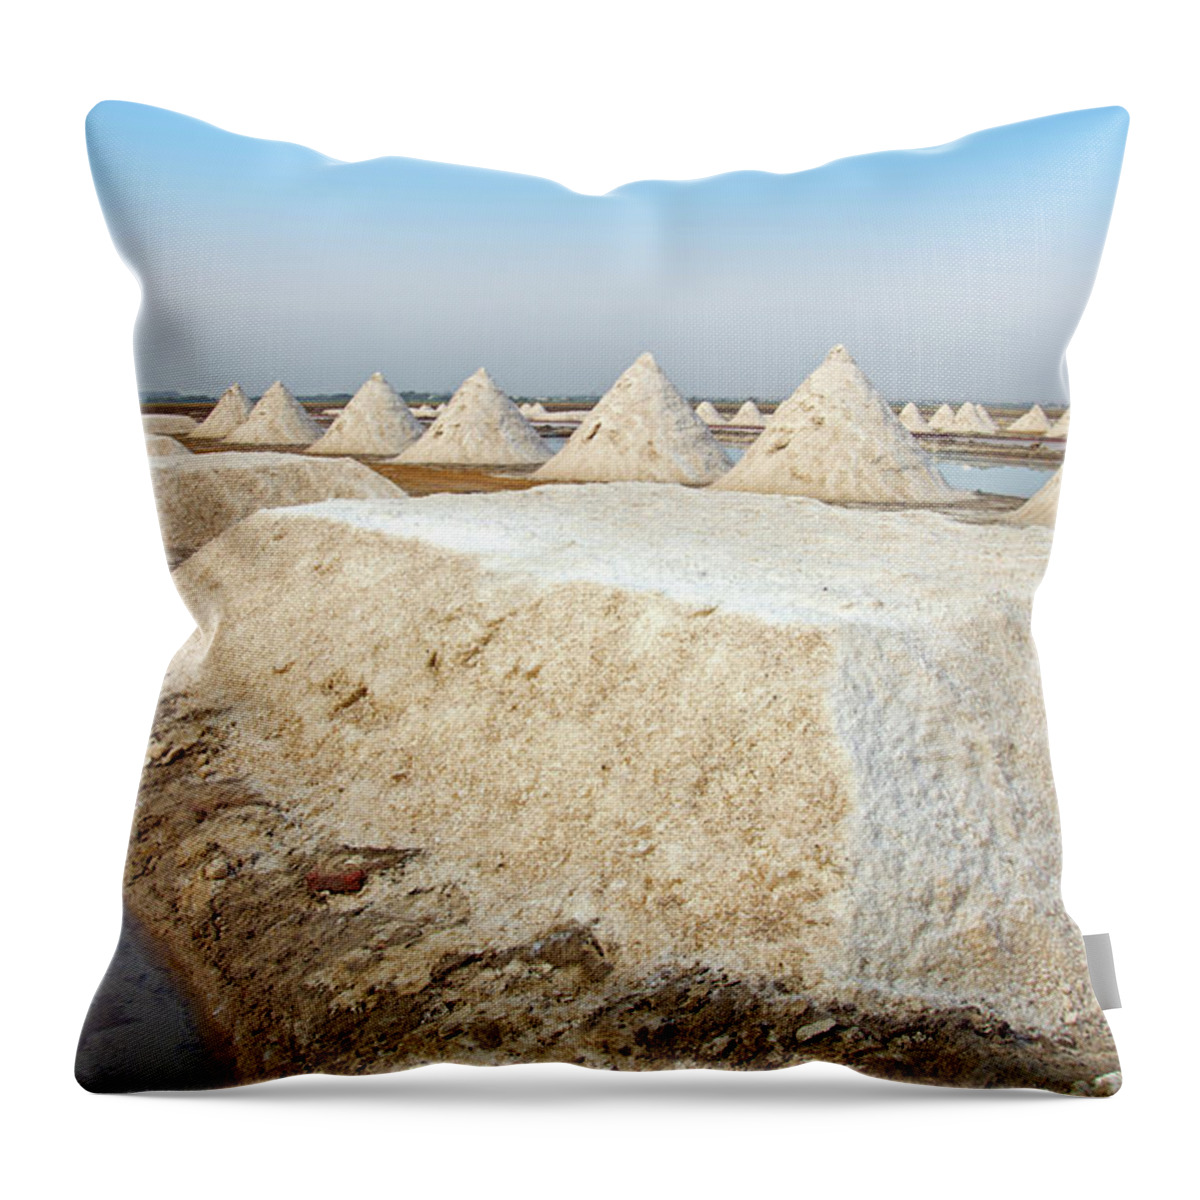 Tranquility Throw Pillow featuring the photograph Salt Field by Sm Rafiq Photography.